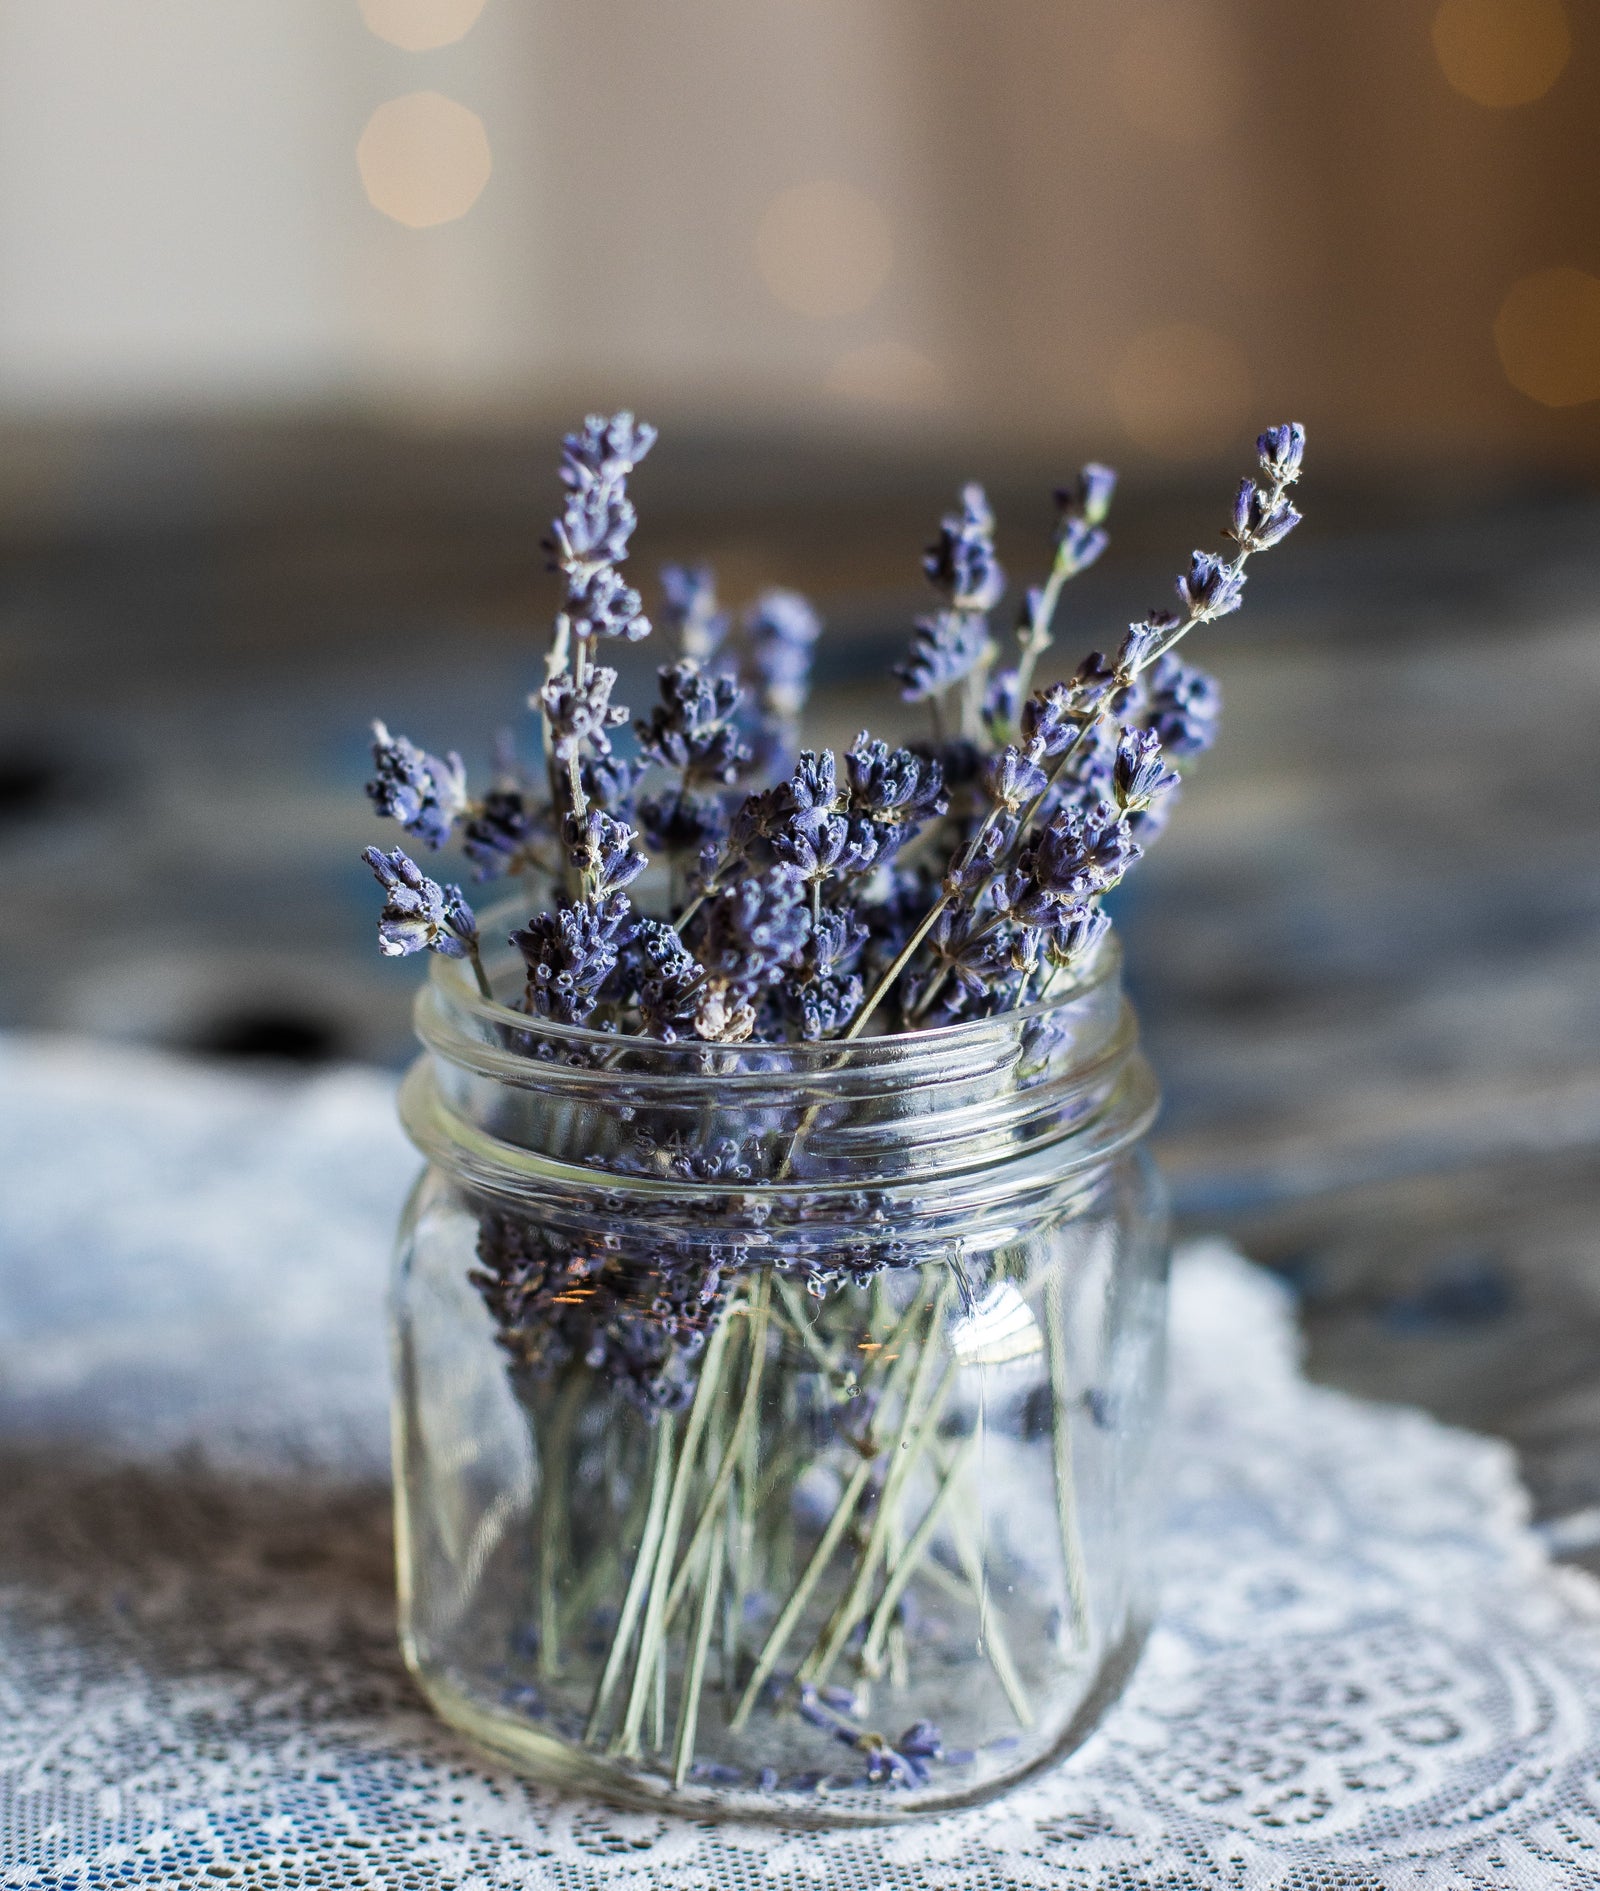 7 Uses For Lavender